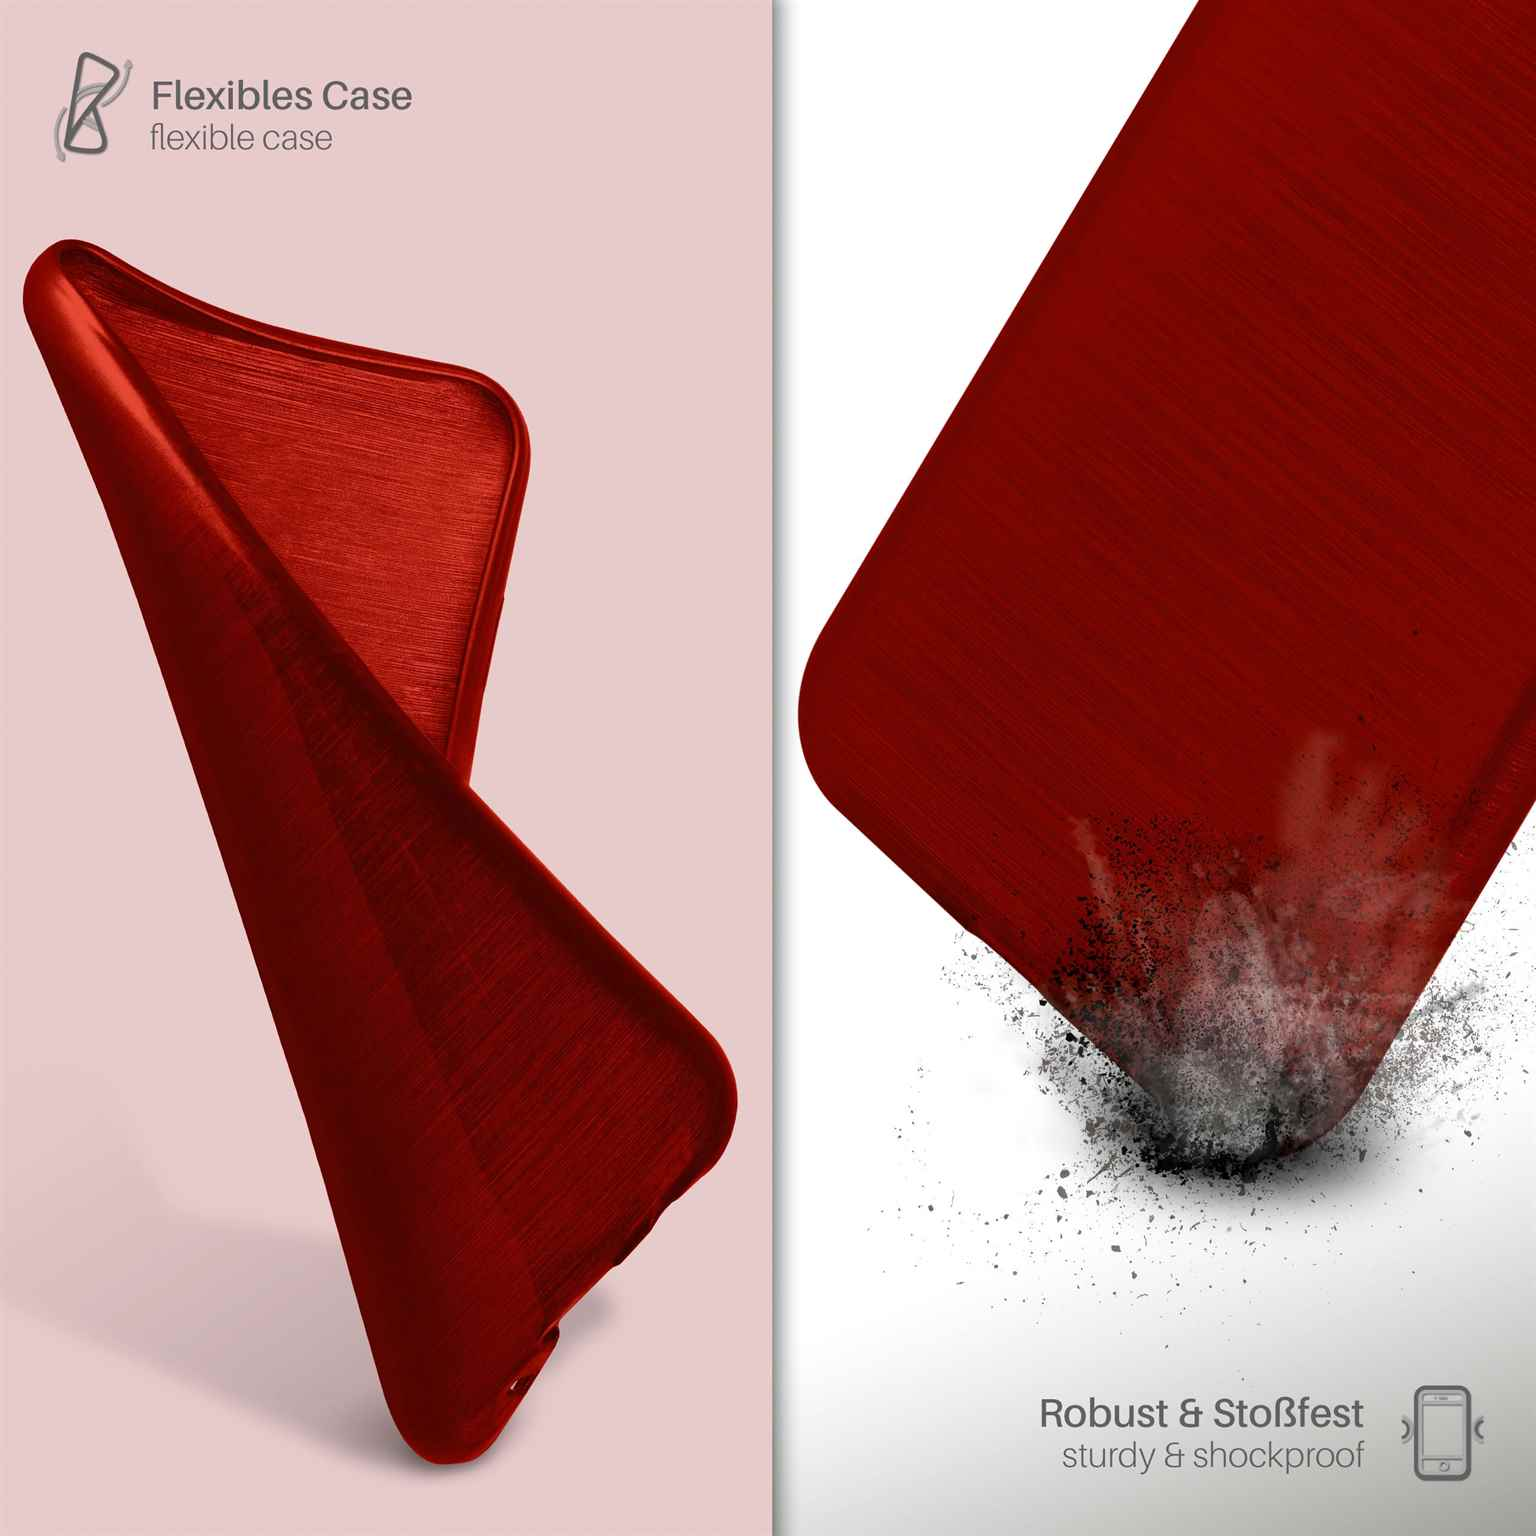 MOEX Brushed Case, Crimson-Red Backcover, 4S, Apple, iPhone